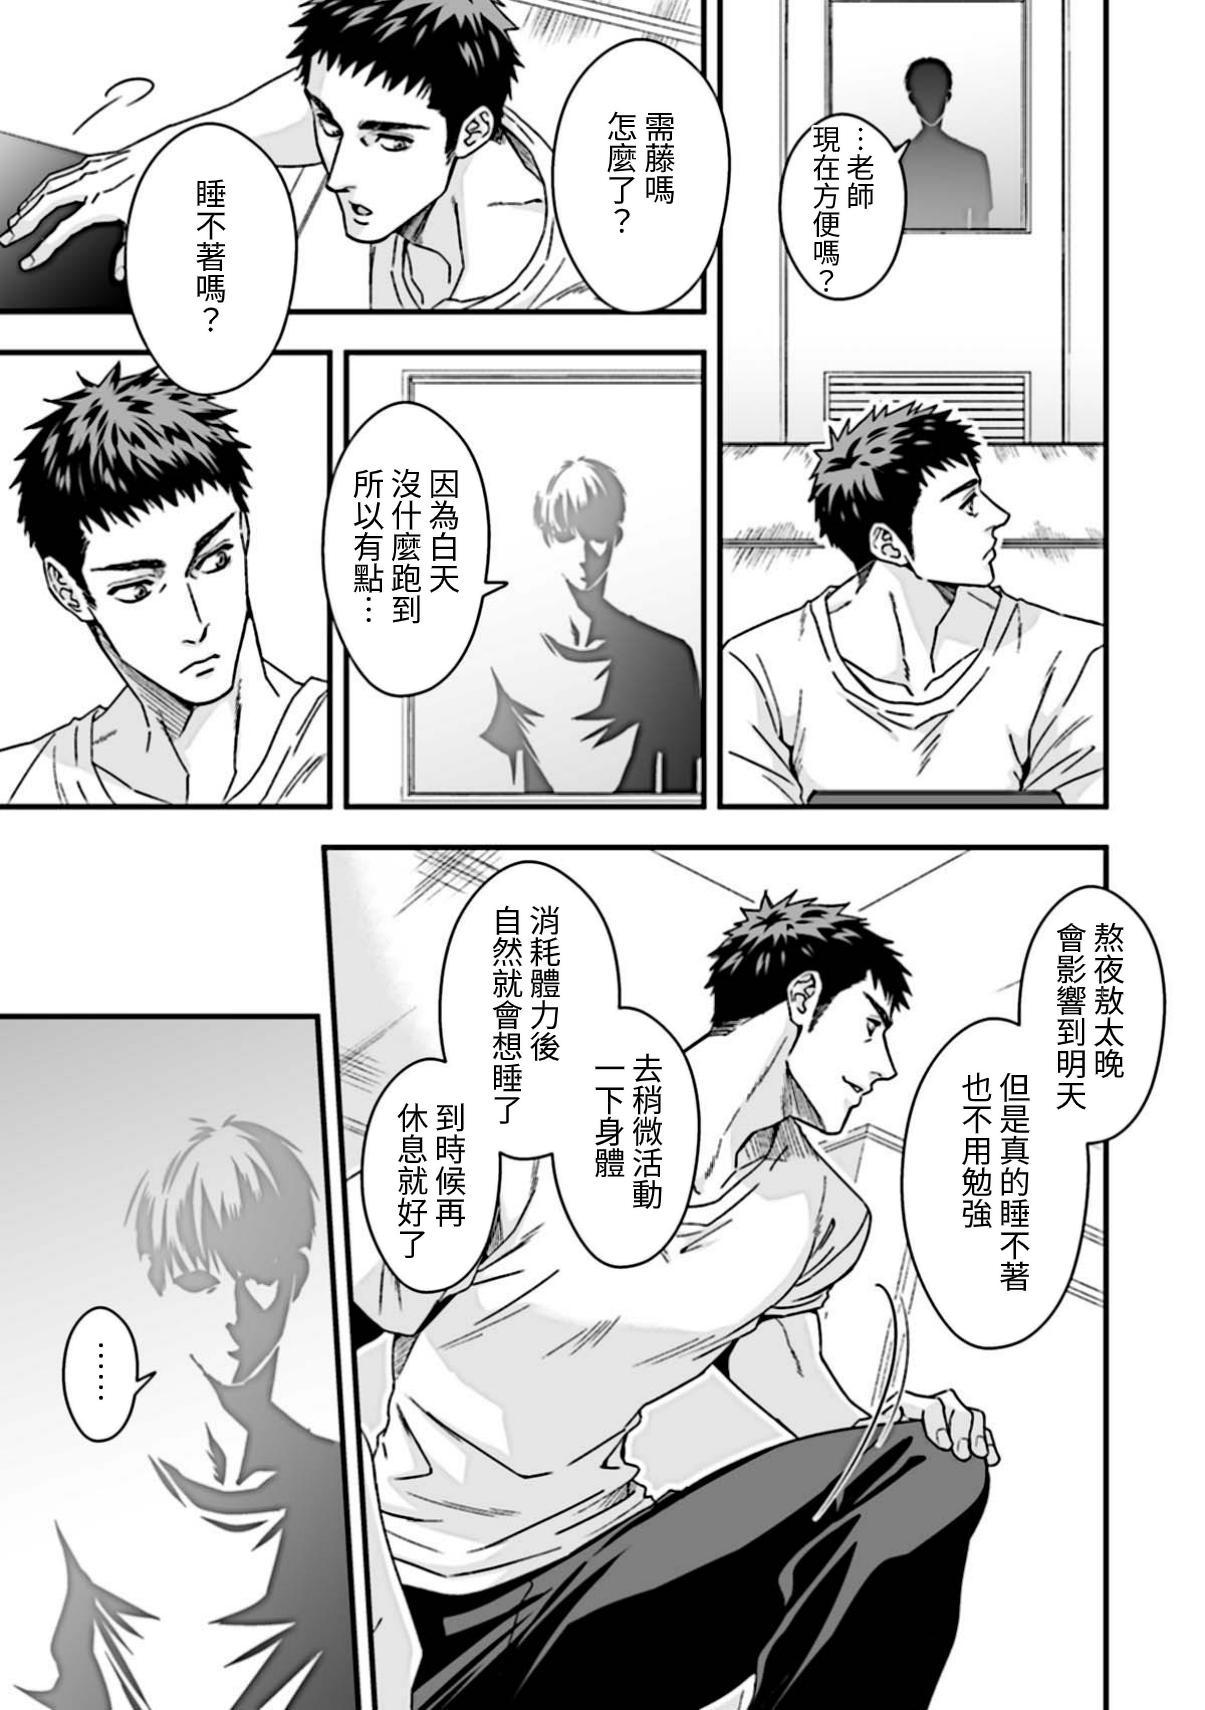 Cheerleader 體育教師2 Moaning - Page 5